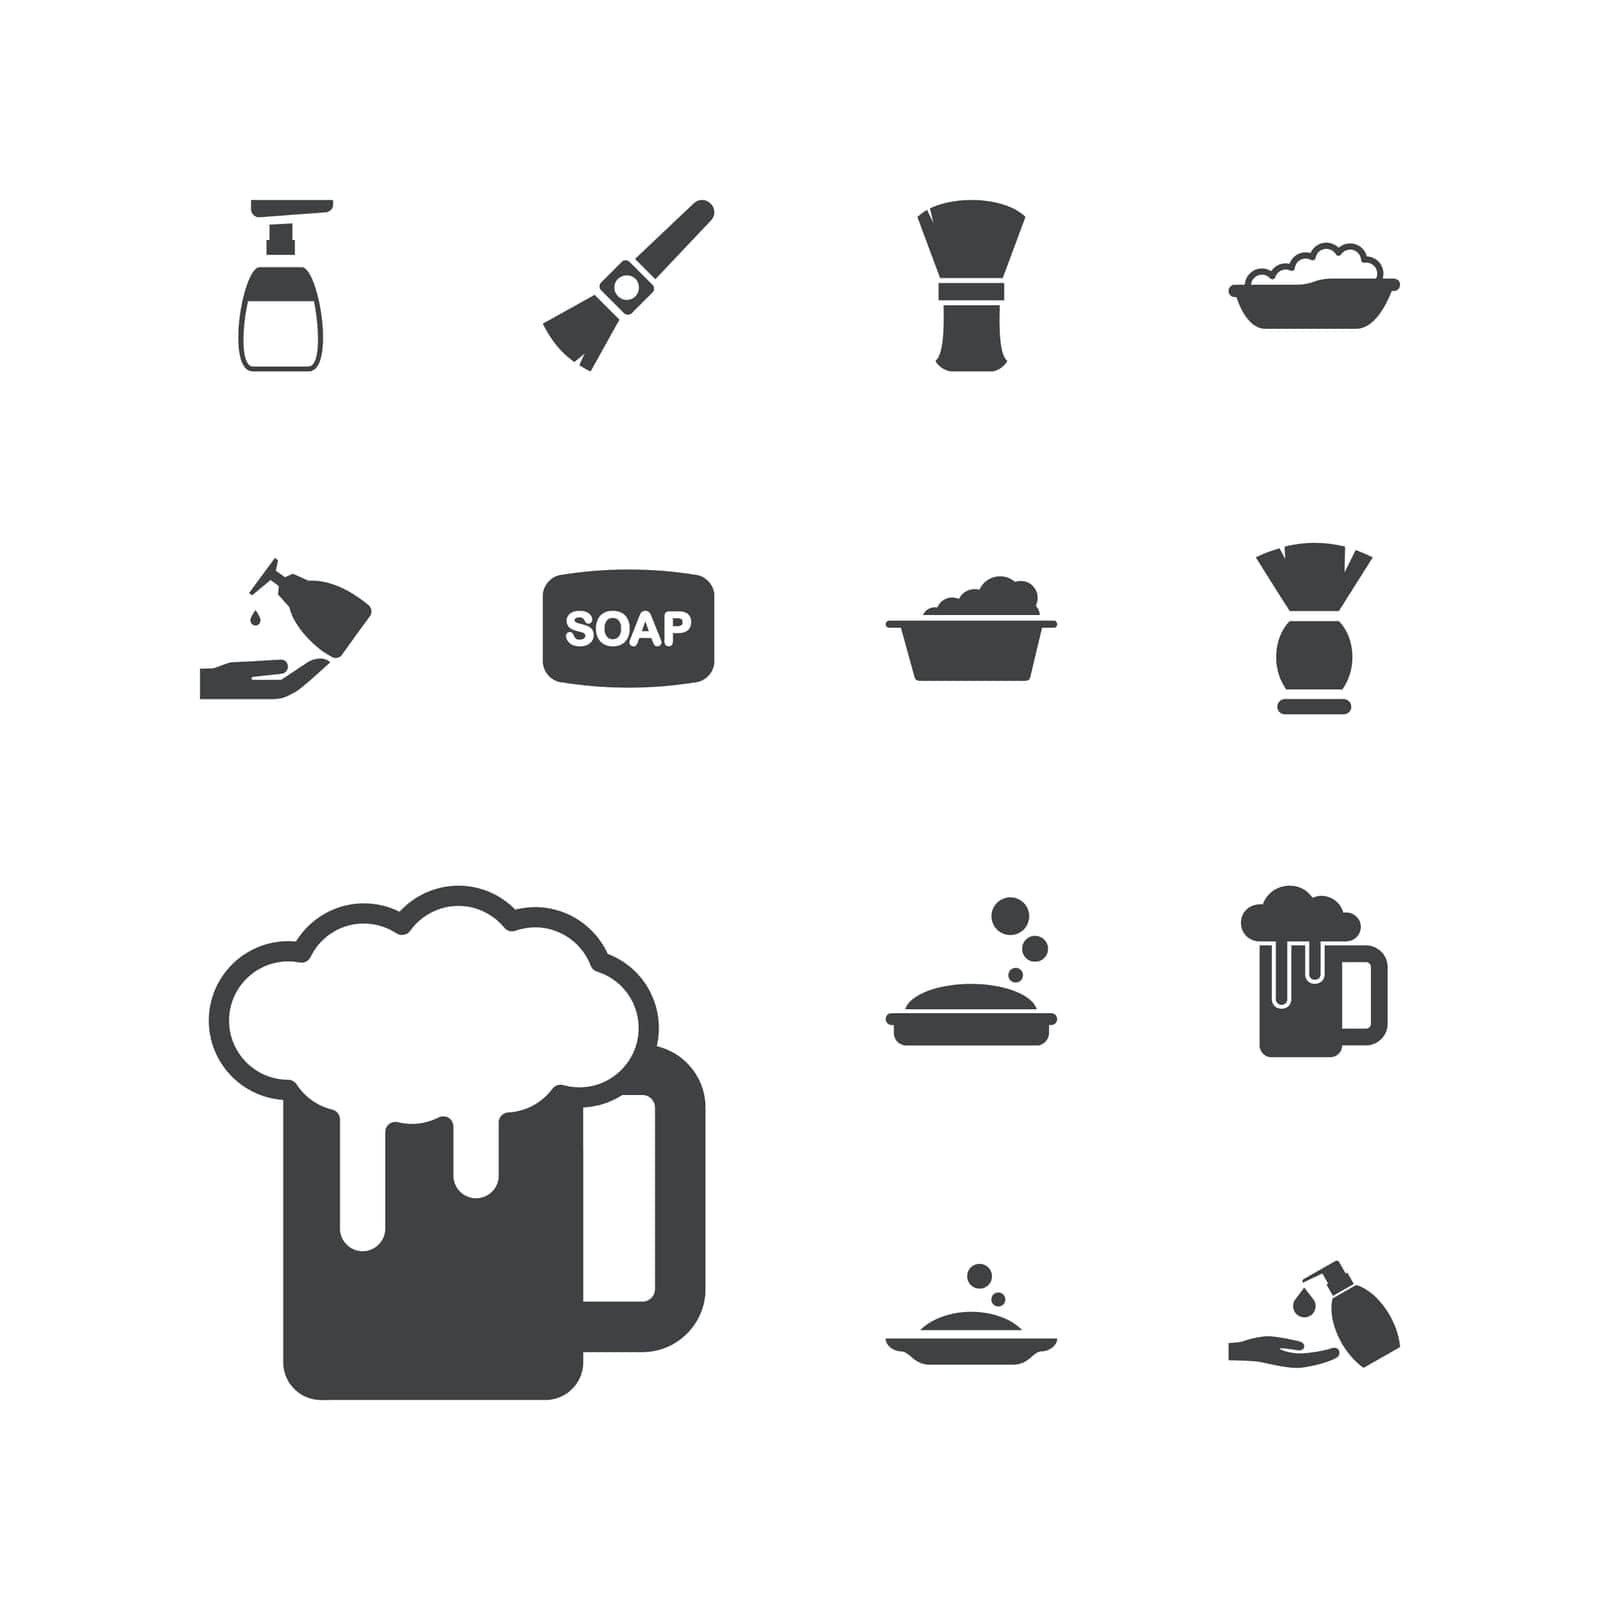 symbol,beauty,foam,icon,sign,skin,isolated,for,hair,white,bubble,web,laundry,hygiene,and,design,vector,bath,graphic,beer,brush,set,wash,mobile,health,shaving,clean,water,face,plastic,liquid,background,baby,illustration,mug,soap,object,care